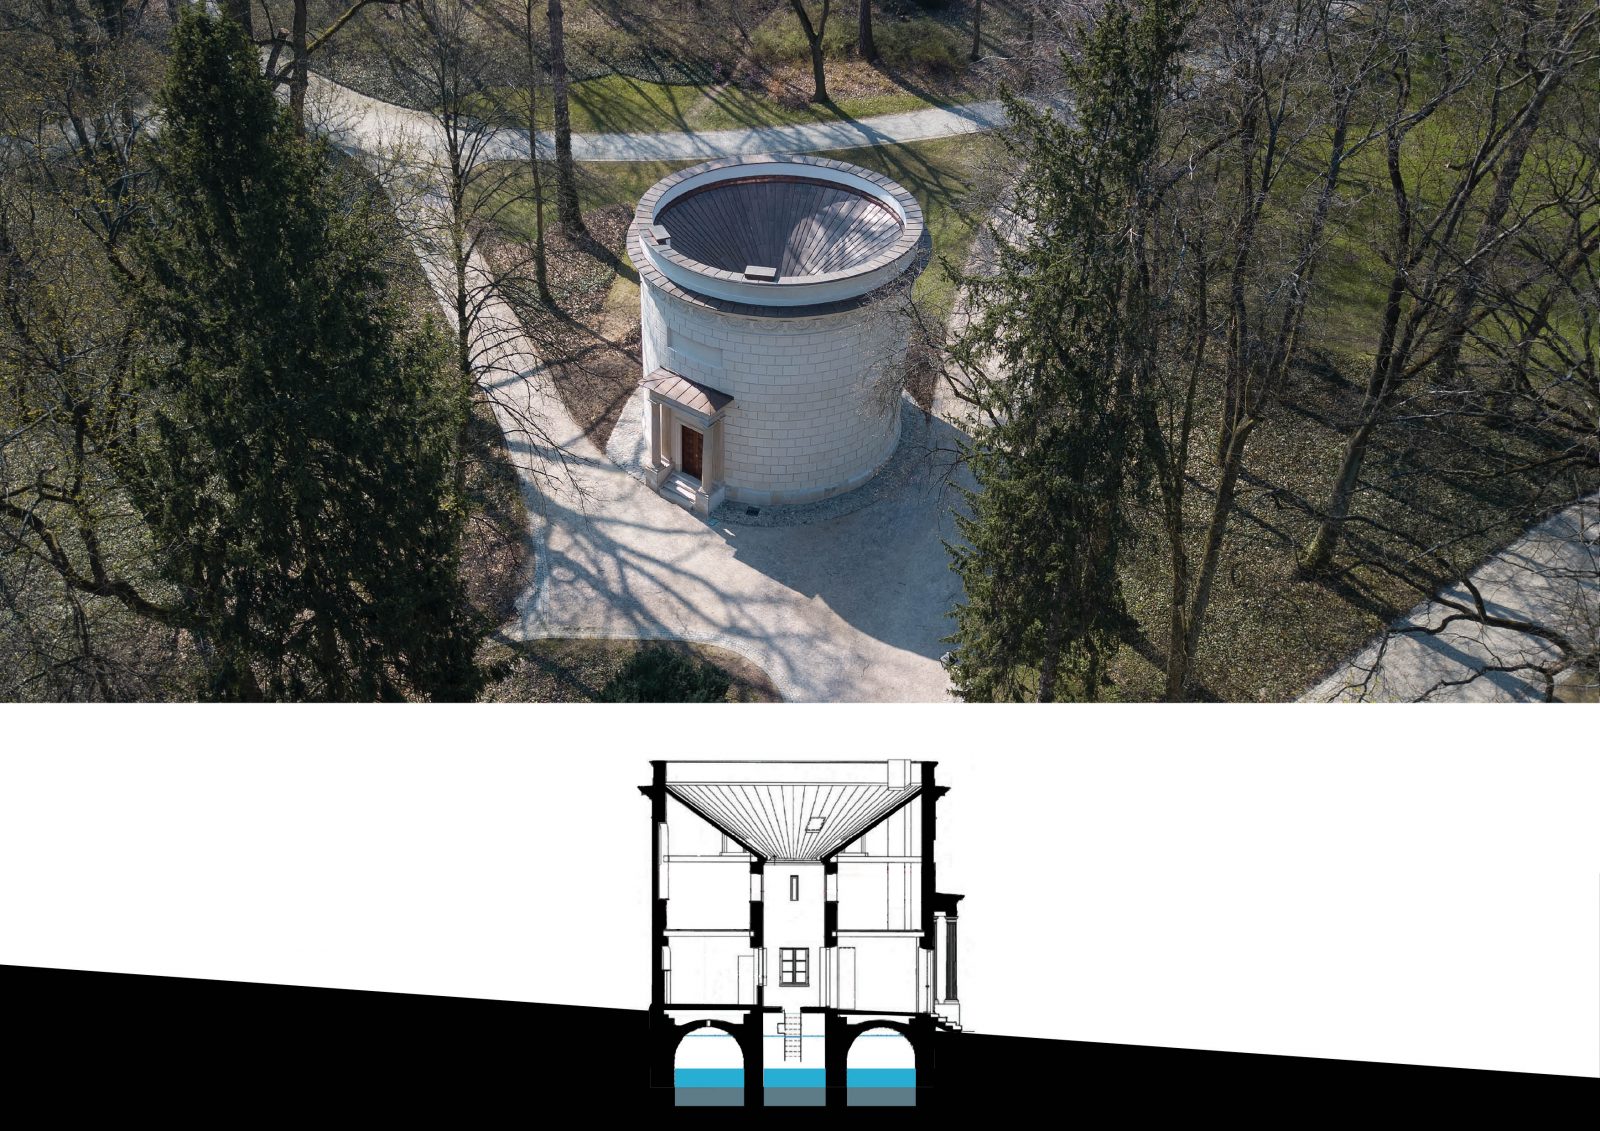 Water tower in Warsaw’s Royal Łazienki Park (1832). This residential building with a small interior courtyard and concave roof collects rainwater in an underground cistern. Photo: Photo Bartosz Wronka, 2019